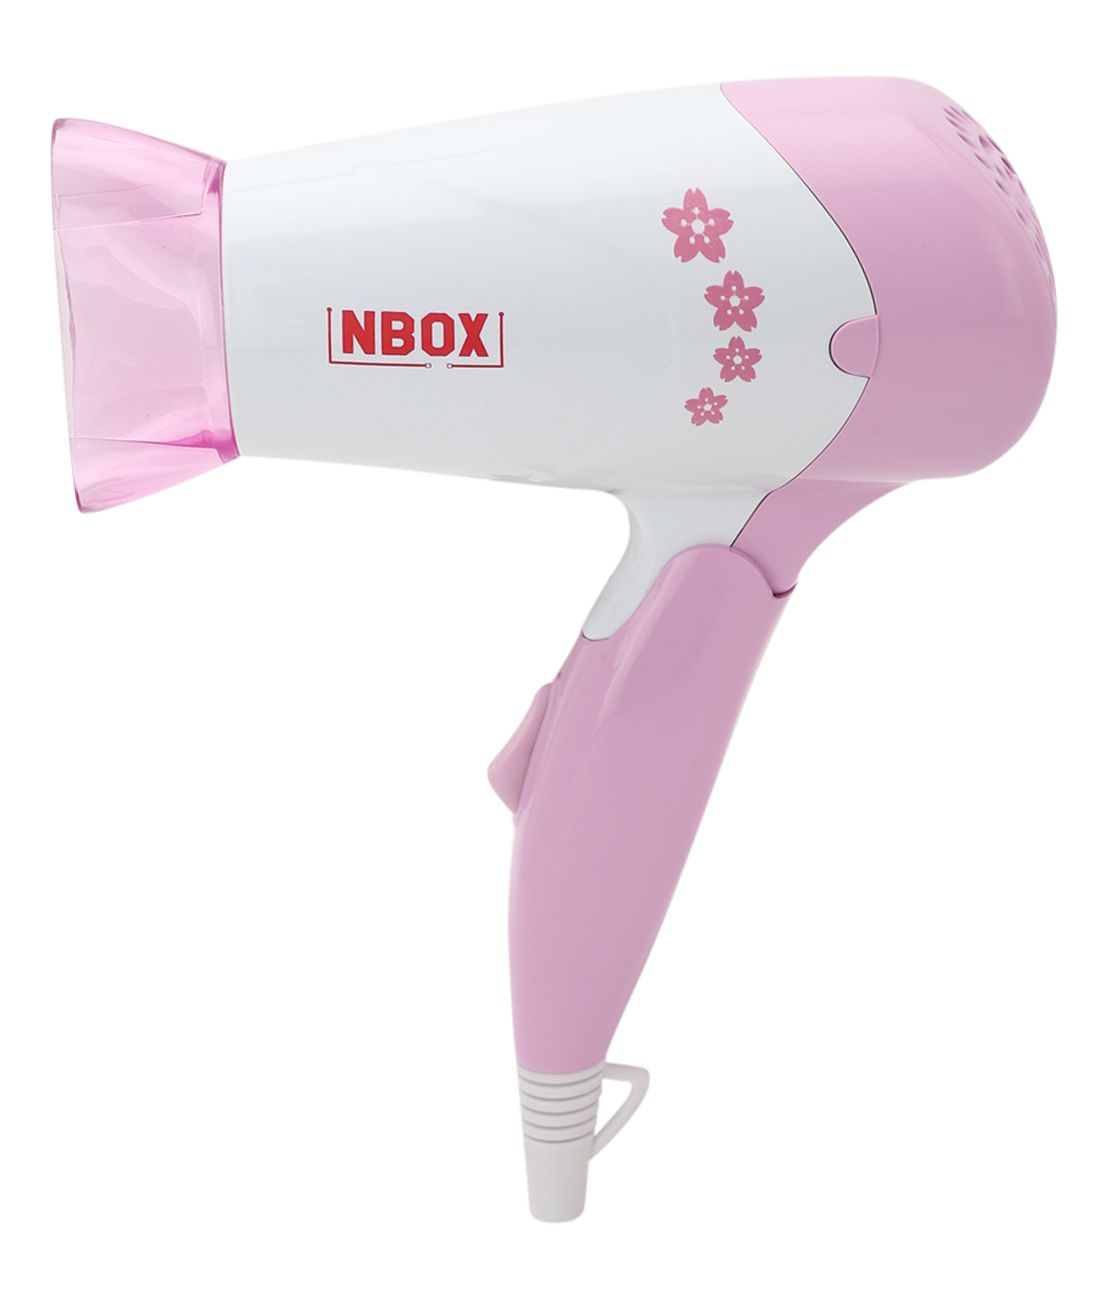     			NBOX Compact & Foldable 1000 Watts Hair Dryer With 2 Heat & Speed Settings, Pink